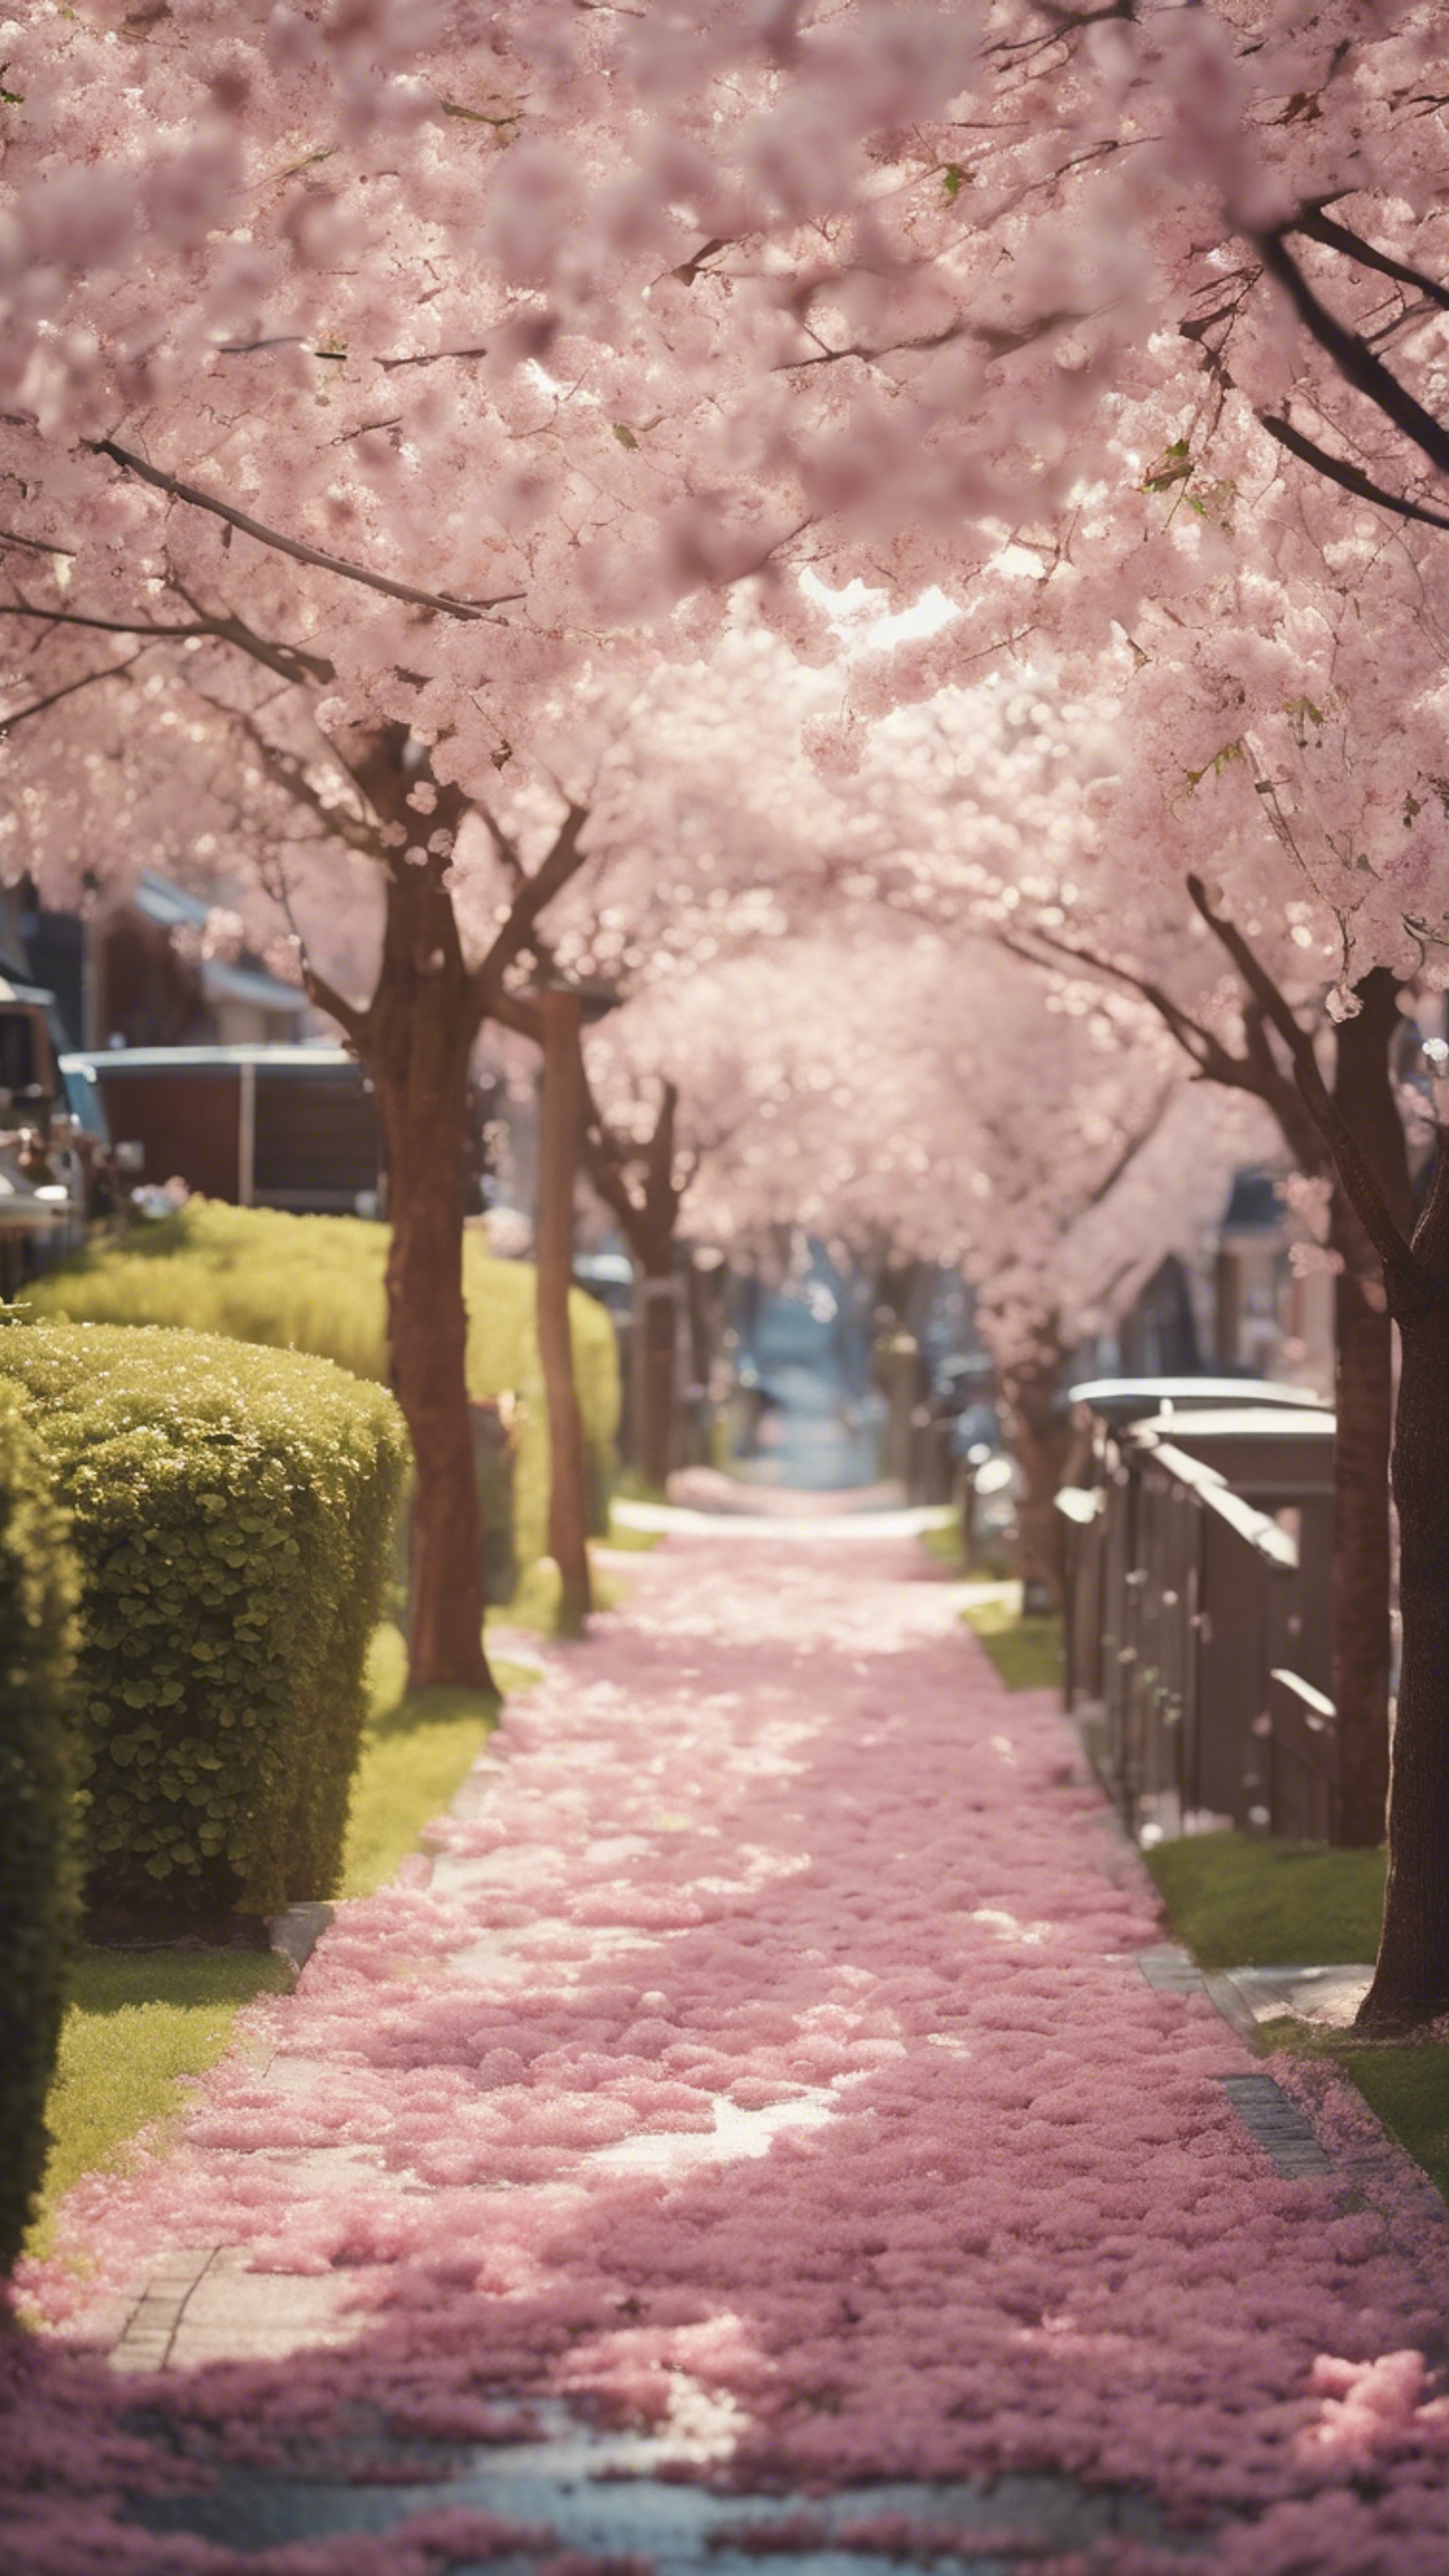 A suburban street lined with houses, and cherry blossom trees showering the pathway with petals, giving an ethereal feel to a sunny spring morning. Tapeta[d085be0bf6ea43718843]